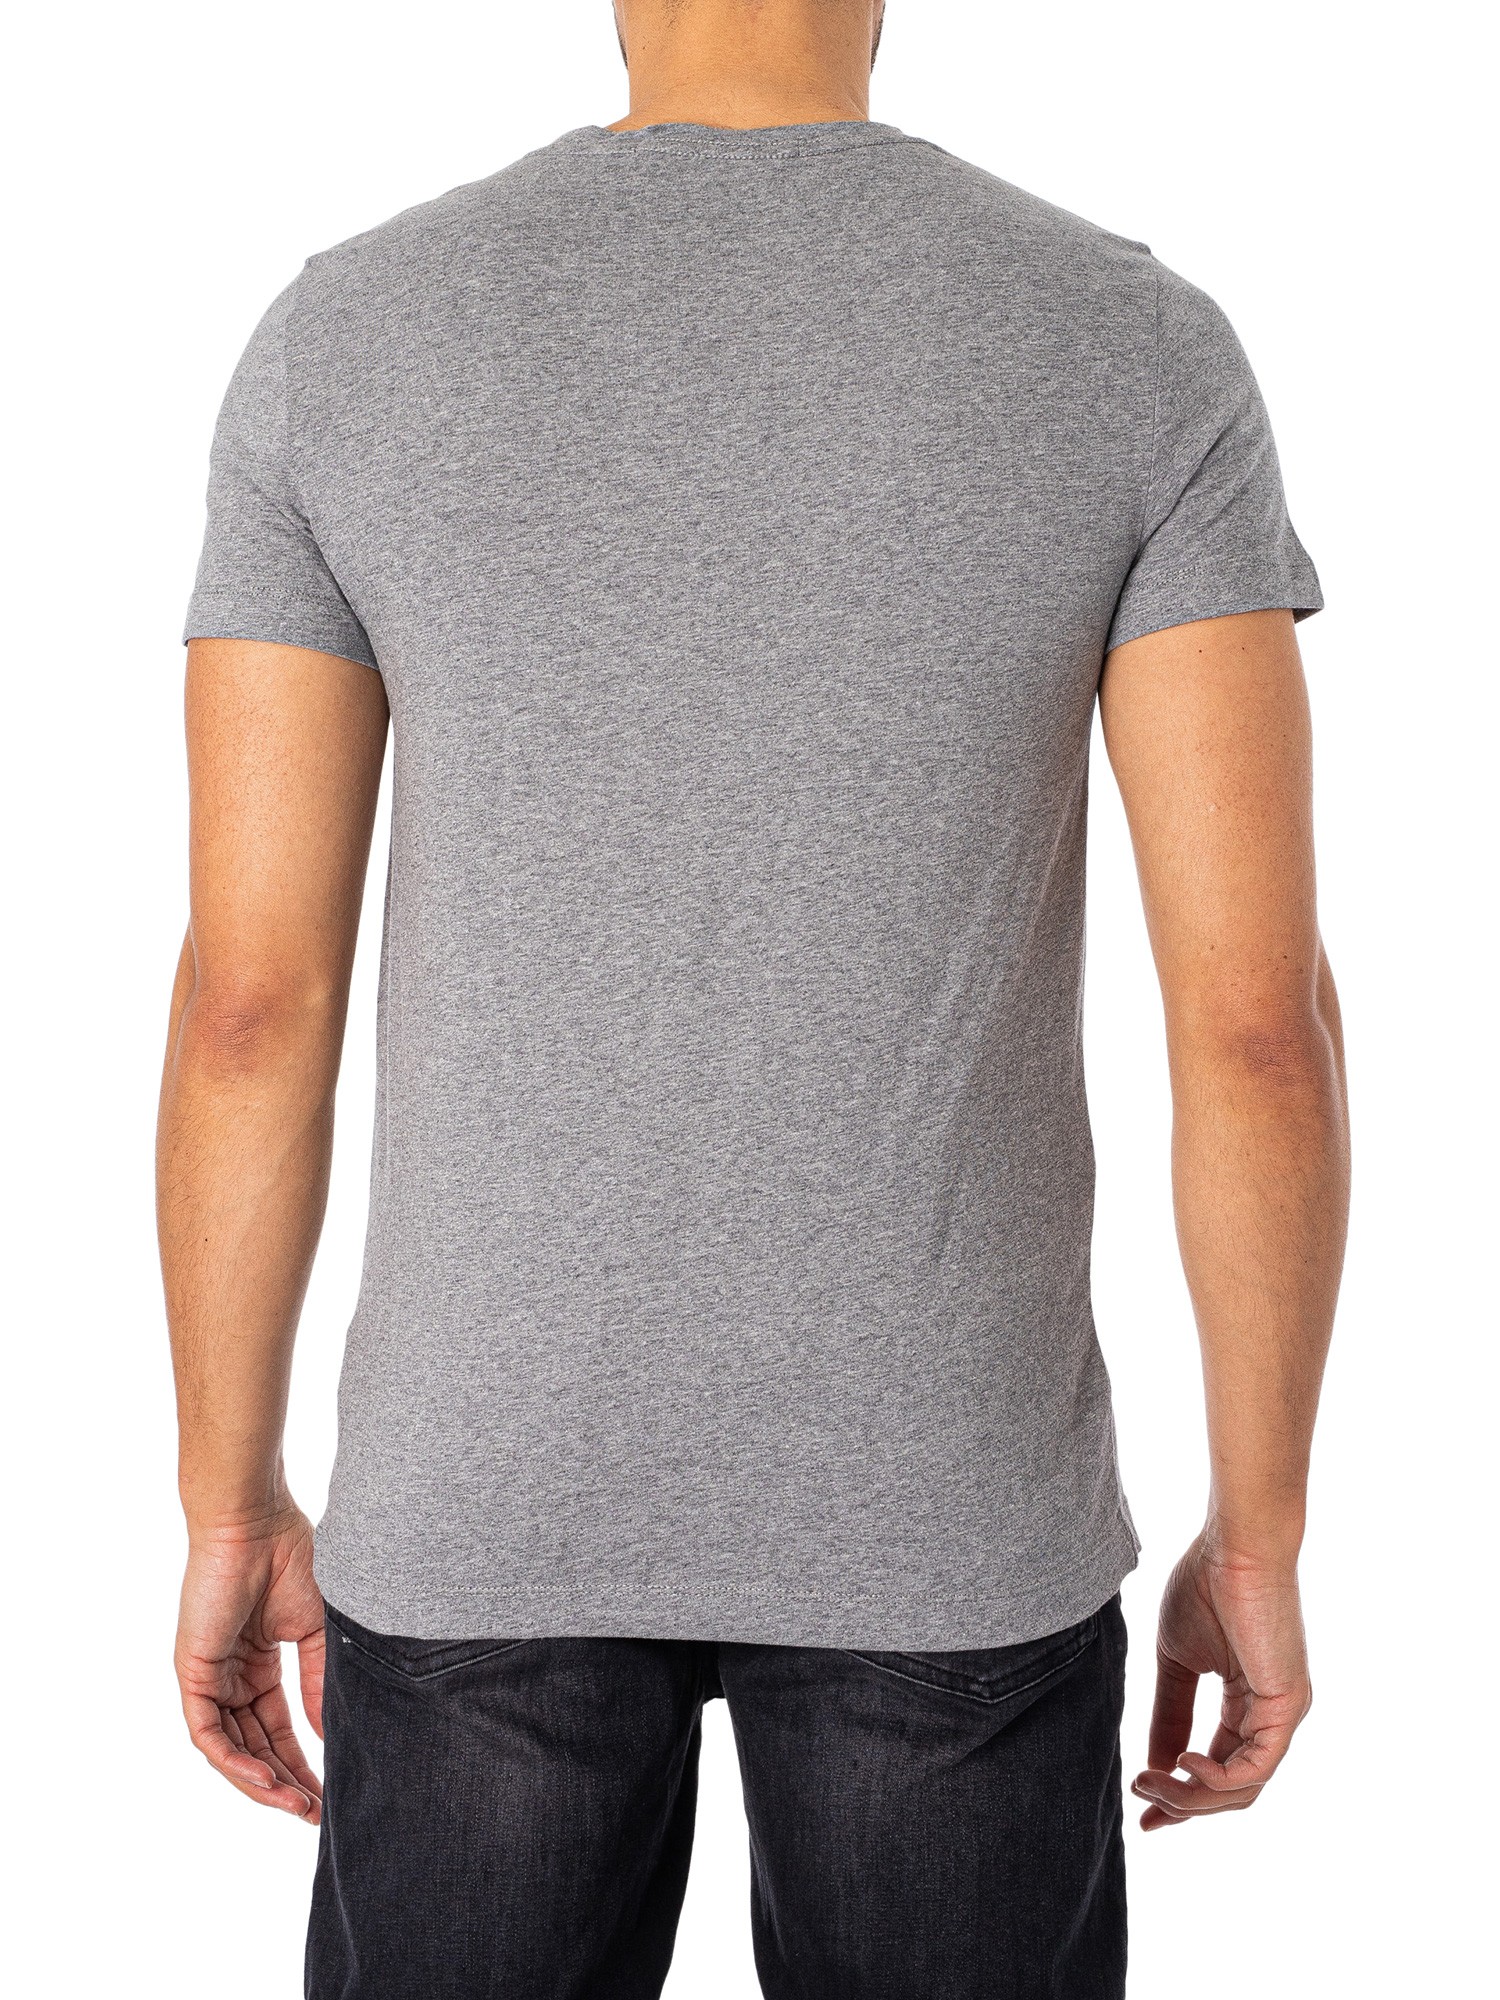 Calvin Klein Jeans Core Institutional T-Shirt - Grey Heather | Standout